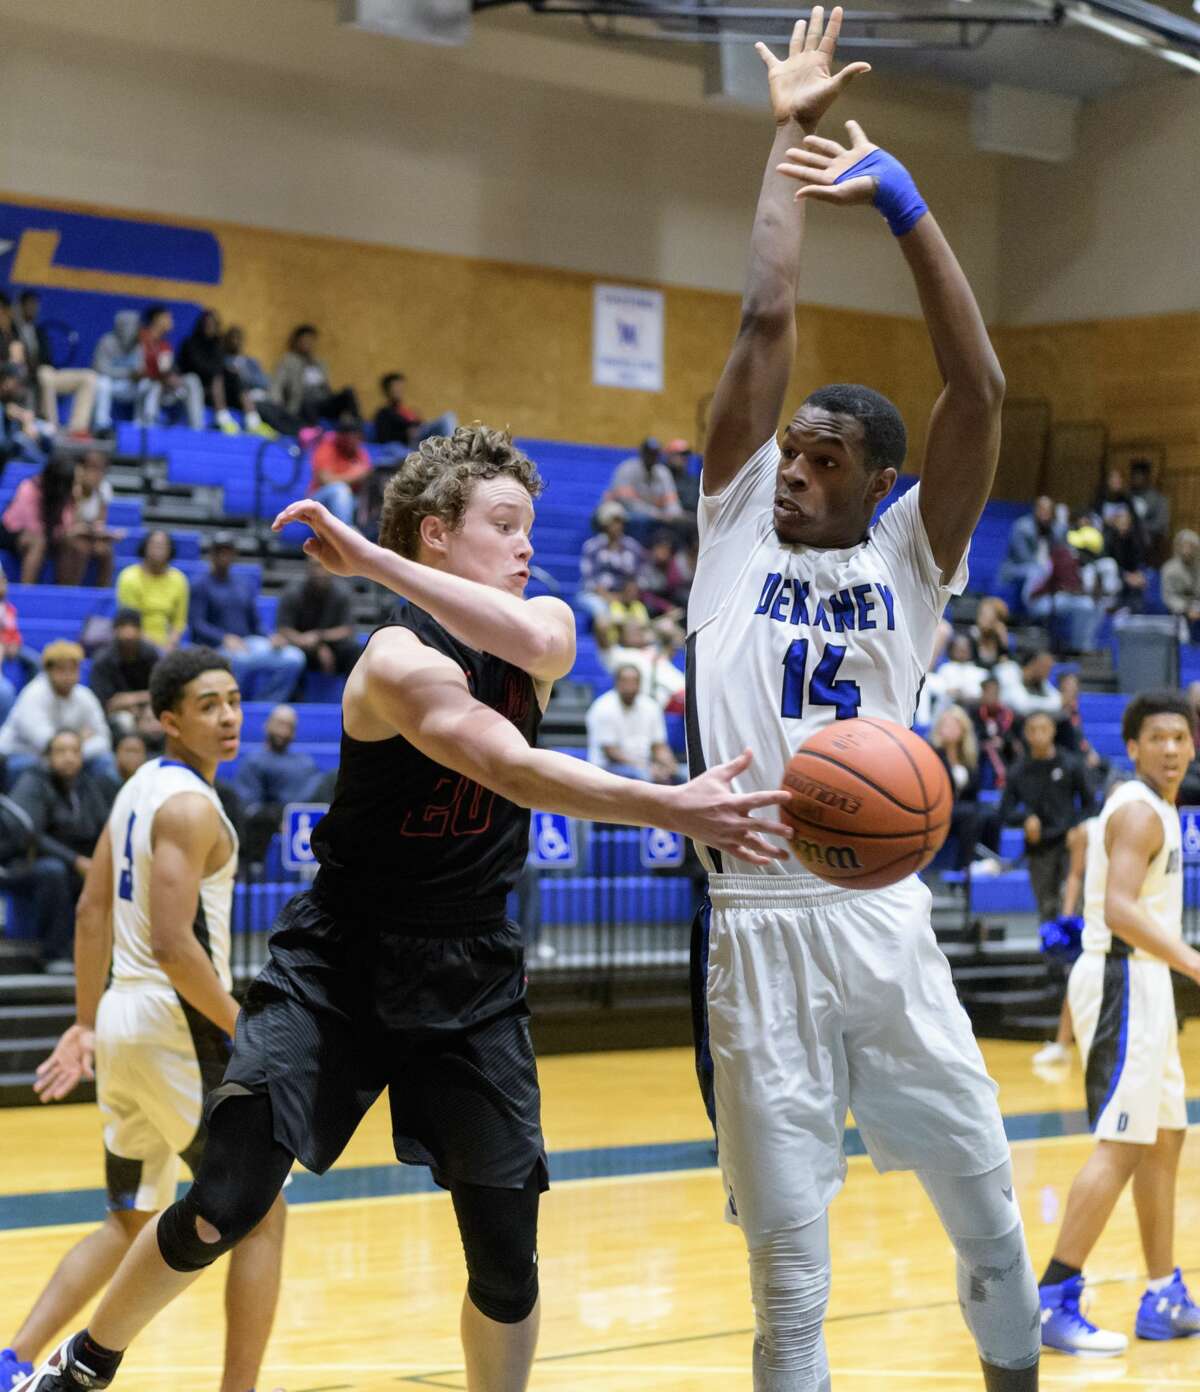 Sam Martin (20) of the Westfield Mustangs passes the ball around Anthony Nash (14) of the Dekaney Wildcats in a high school basketball game on Friday, January 20, 2017 at the Dekaney High School Gym in Houston Texas.